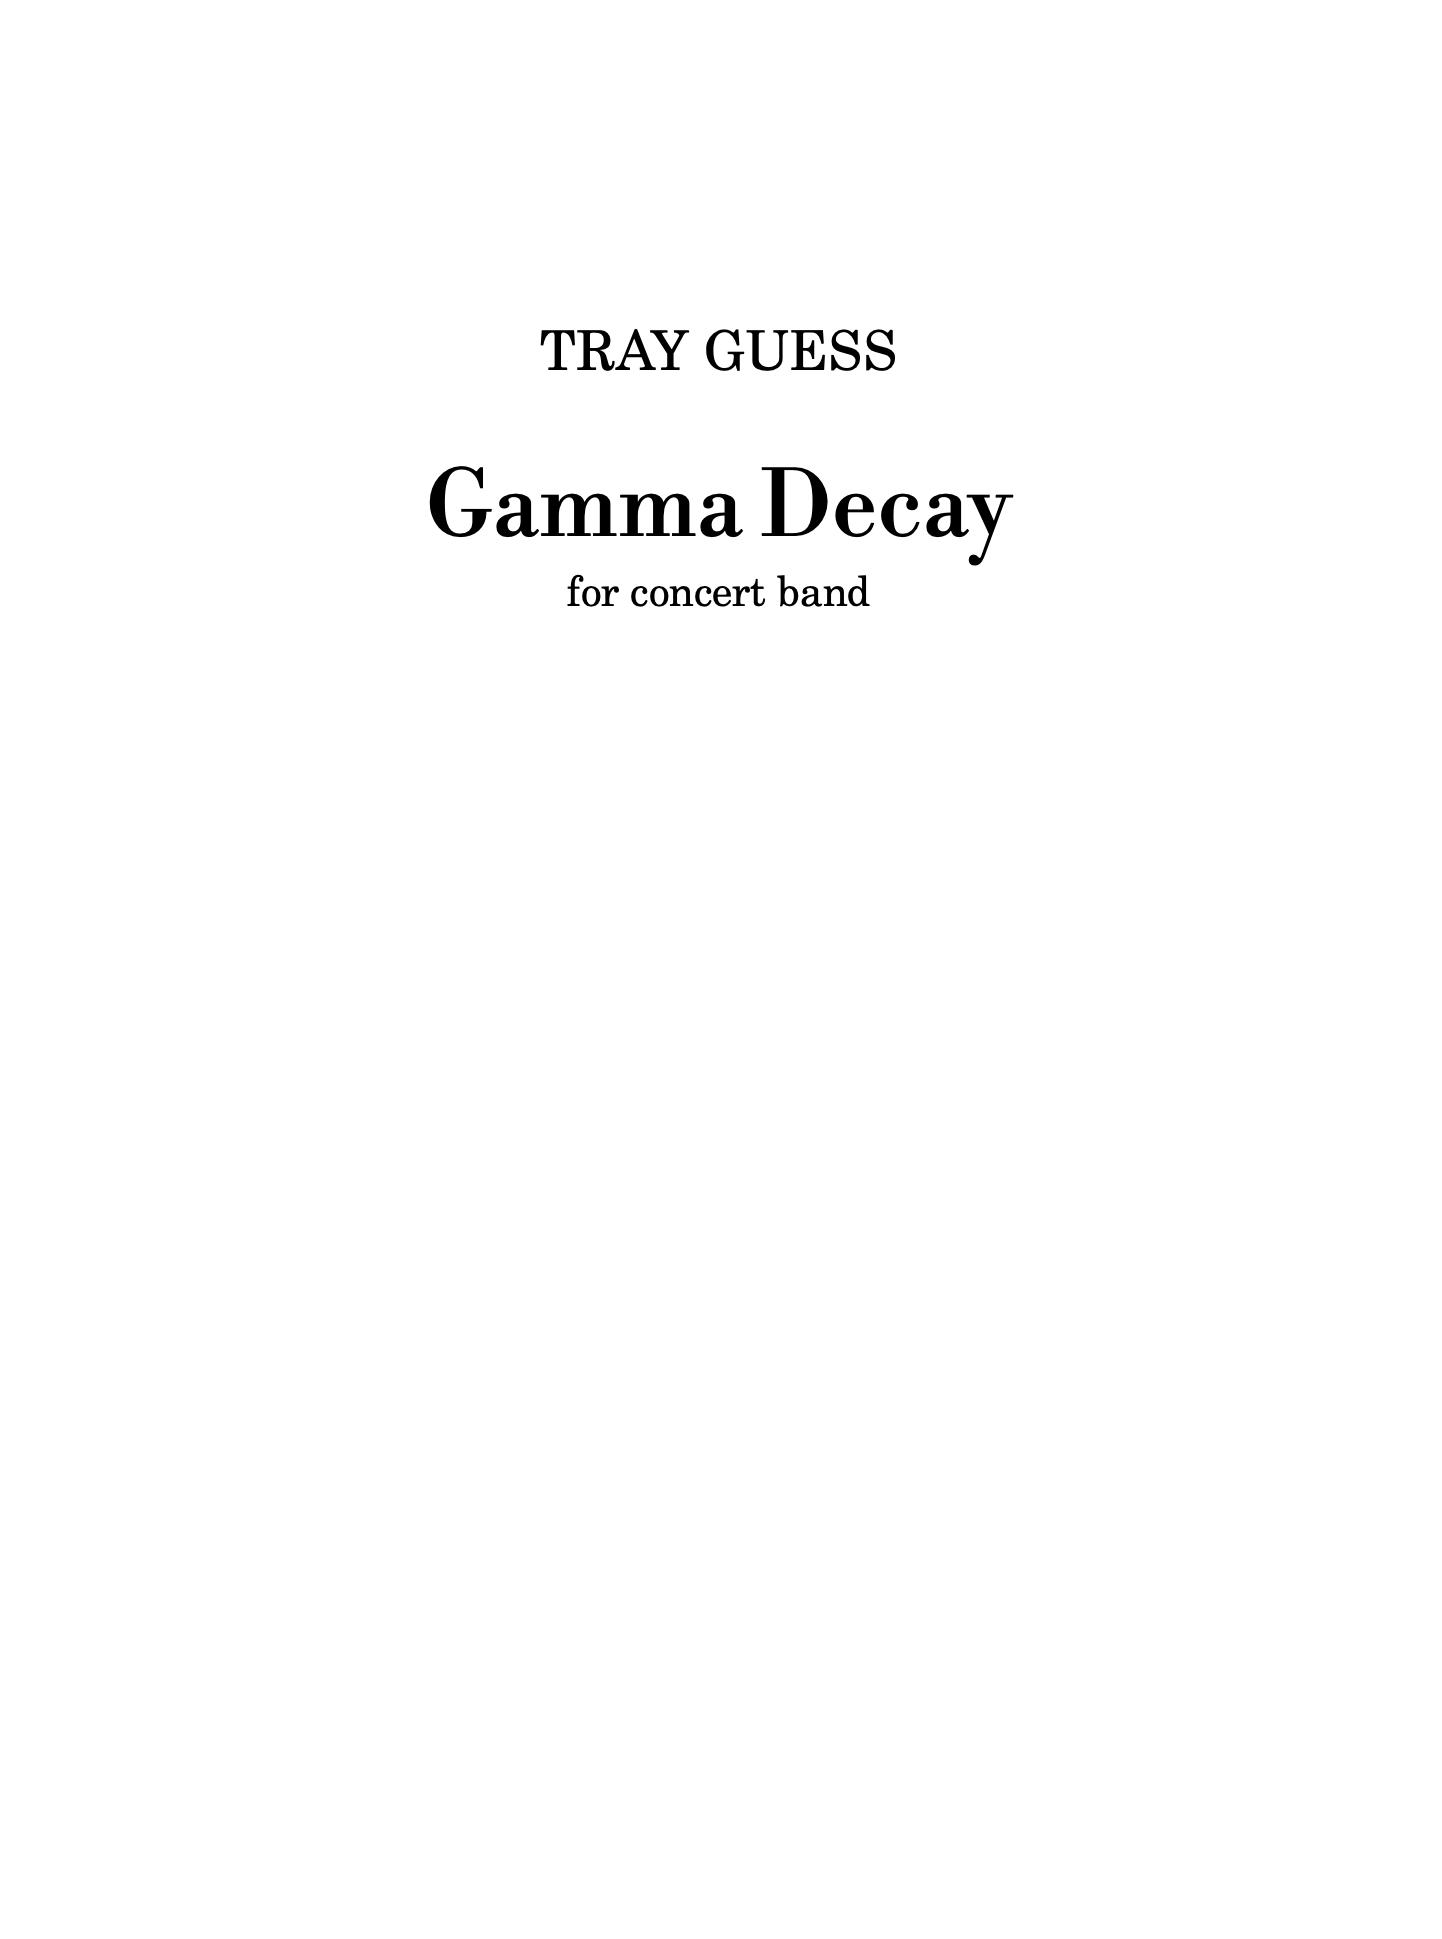 Gamma Decay by Tray Guess